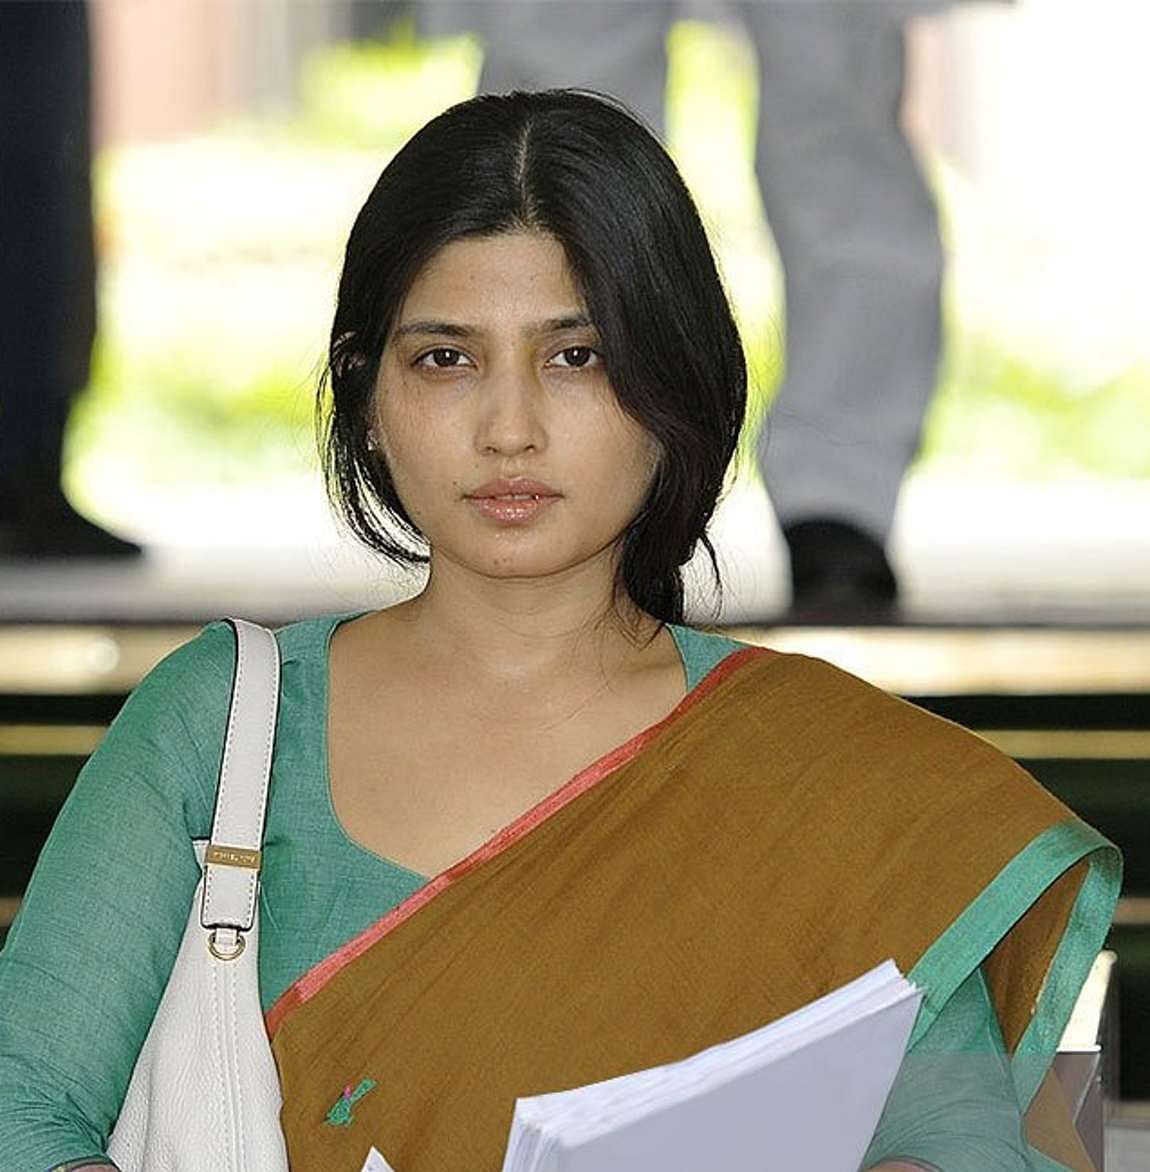 Dimple Yadav The Queen Behind The Scenes In The Samajwadi Crisis